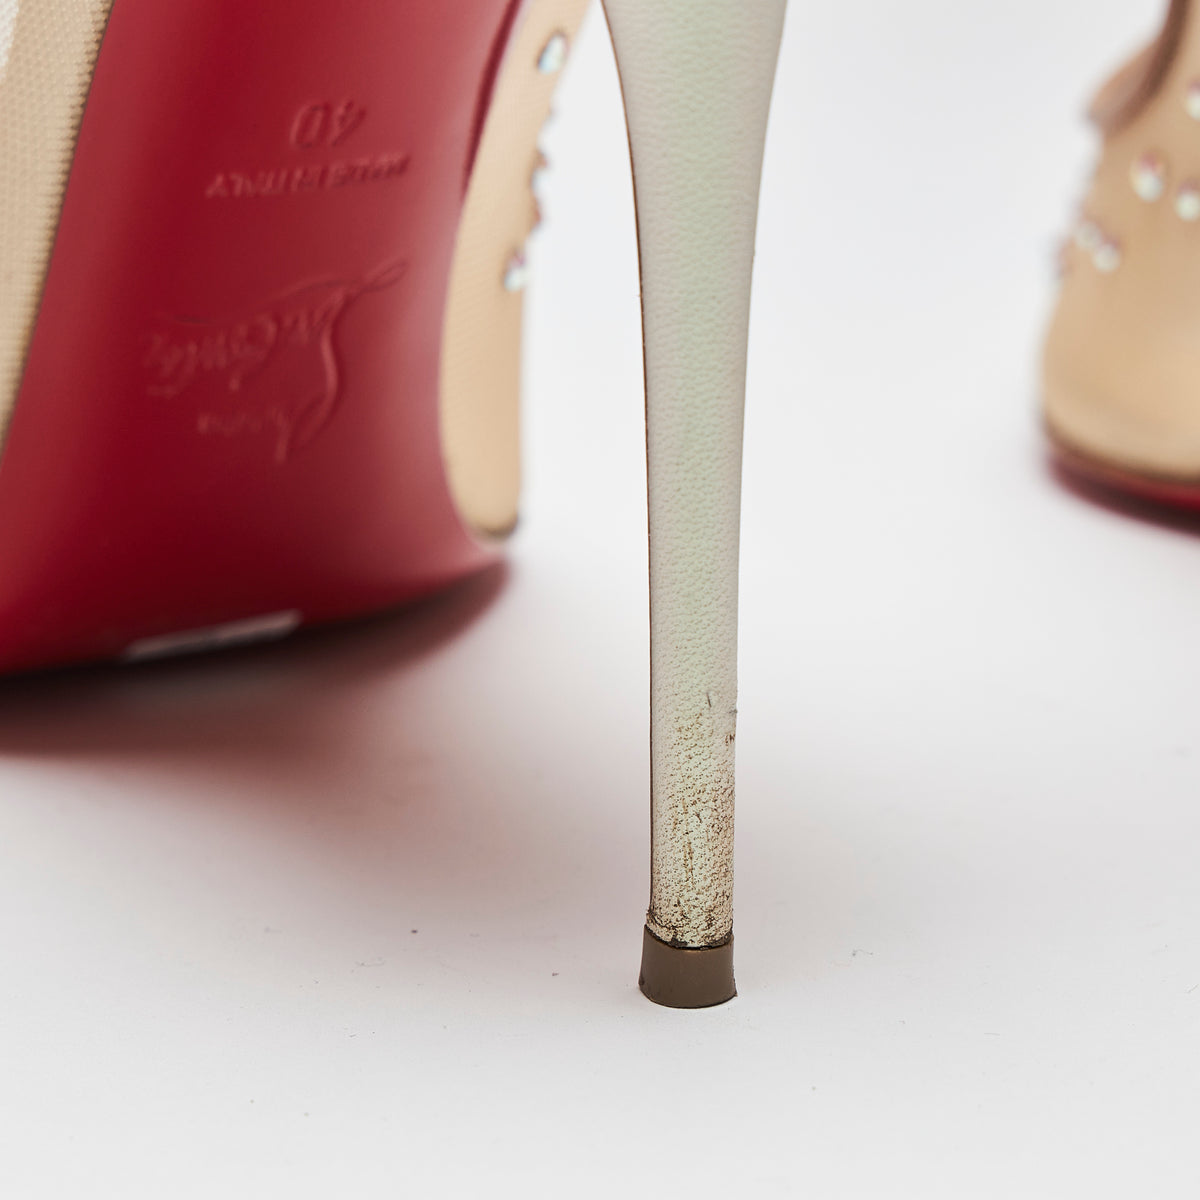 Pre-Loved White Satin Point Toe Heels with Beige Mesh and Crystal Embellishment.(heel Discoloration)